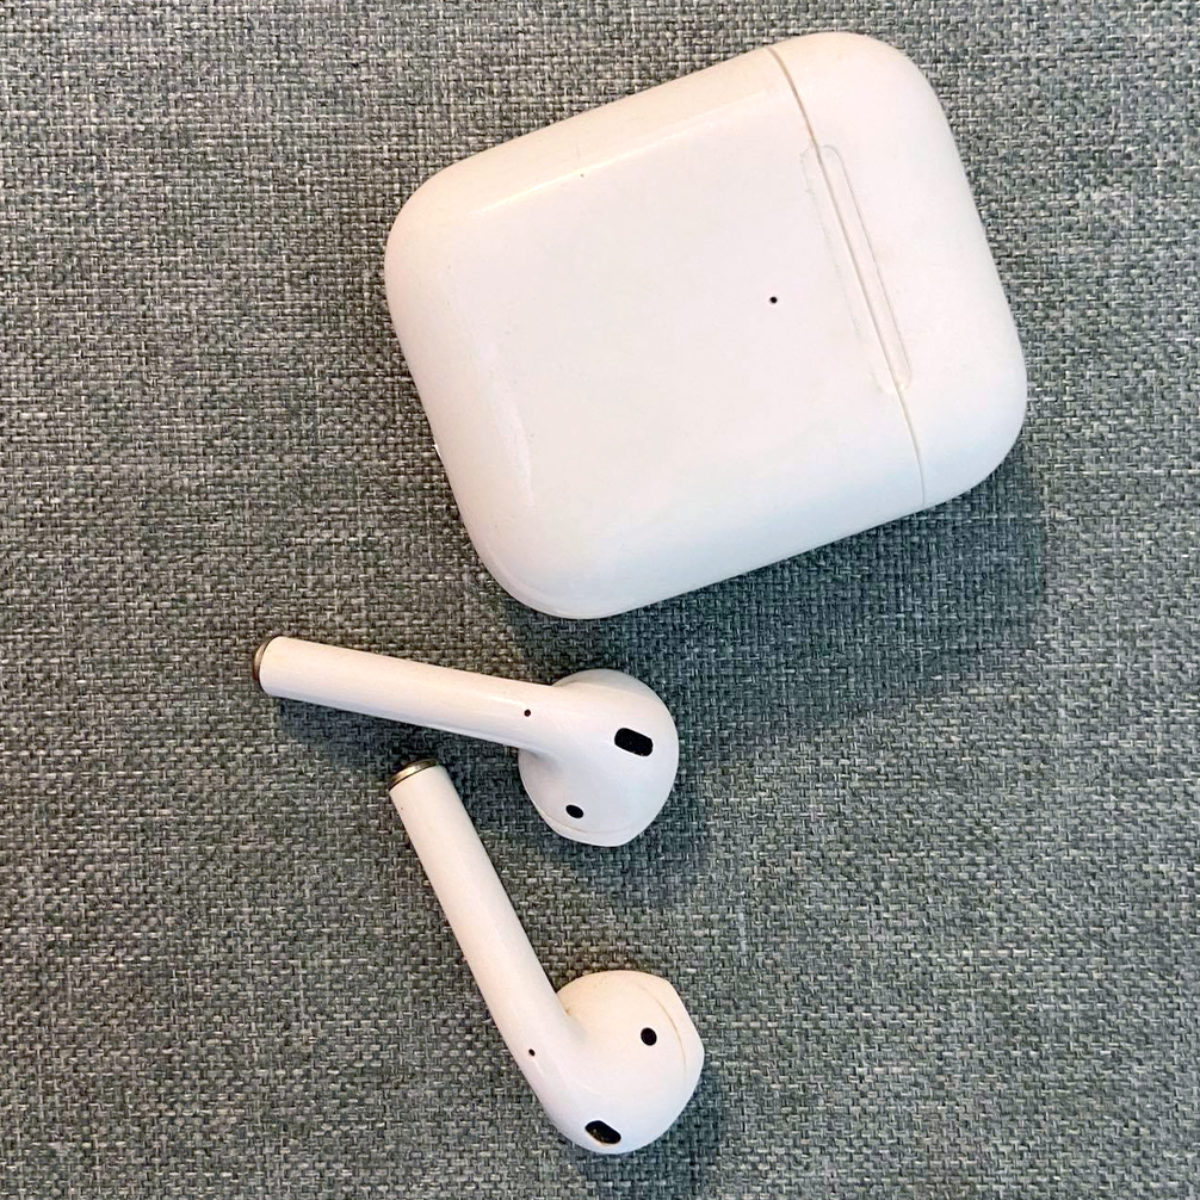 Konfrontere sammen Creep Gaming Review: Apple Airpods – How Will They Fare as Gaming Earbuds? -  Headphonesty